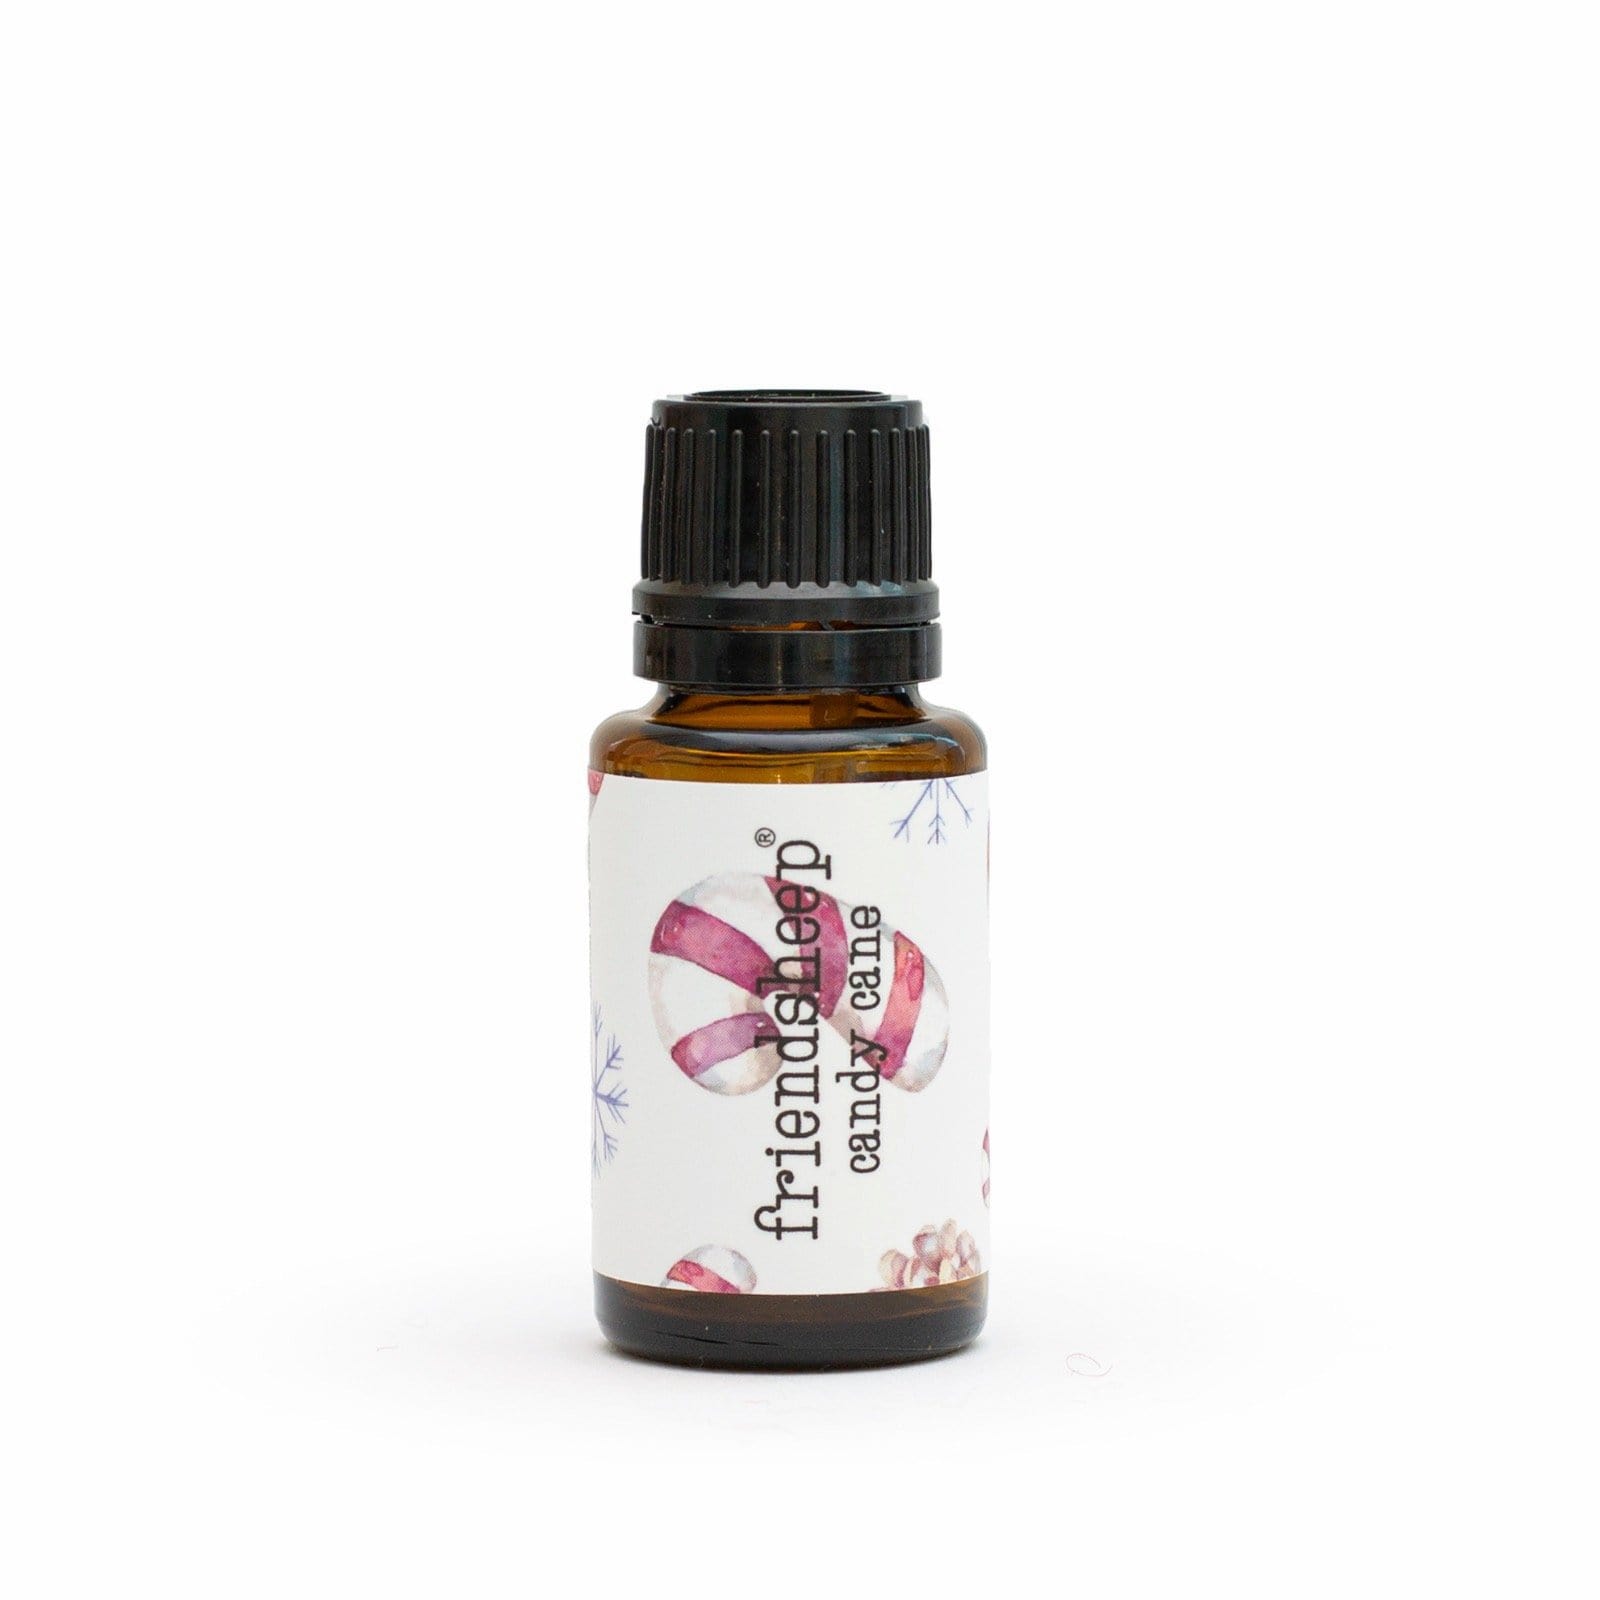 Candy Cane Essential Oil Blend | Friendsheep Sustainable Wool Goods